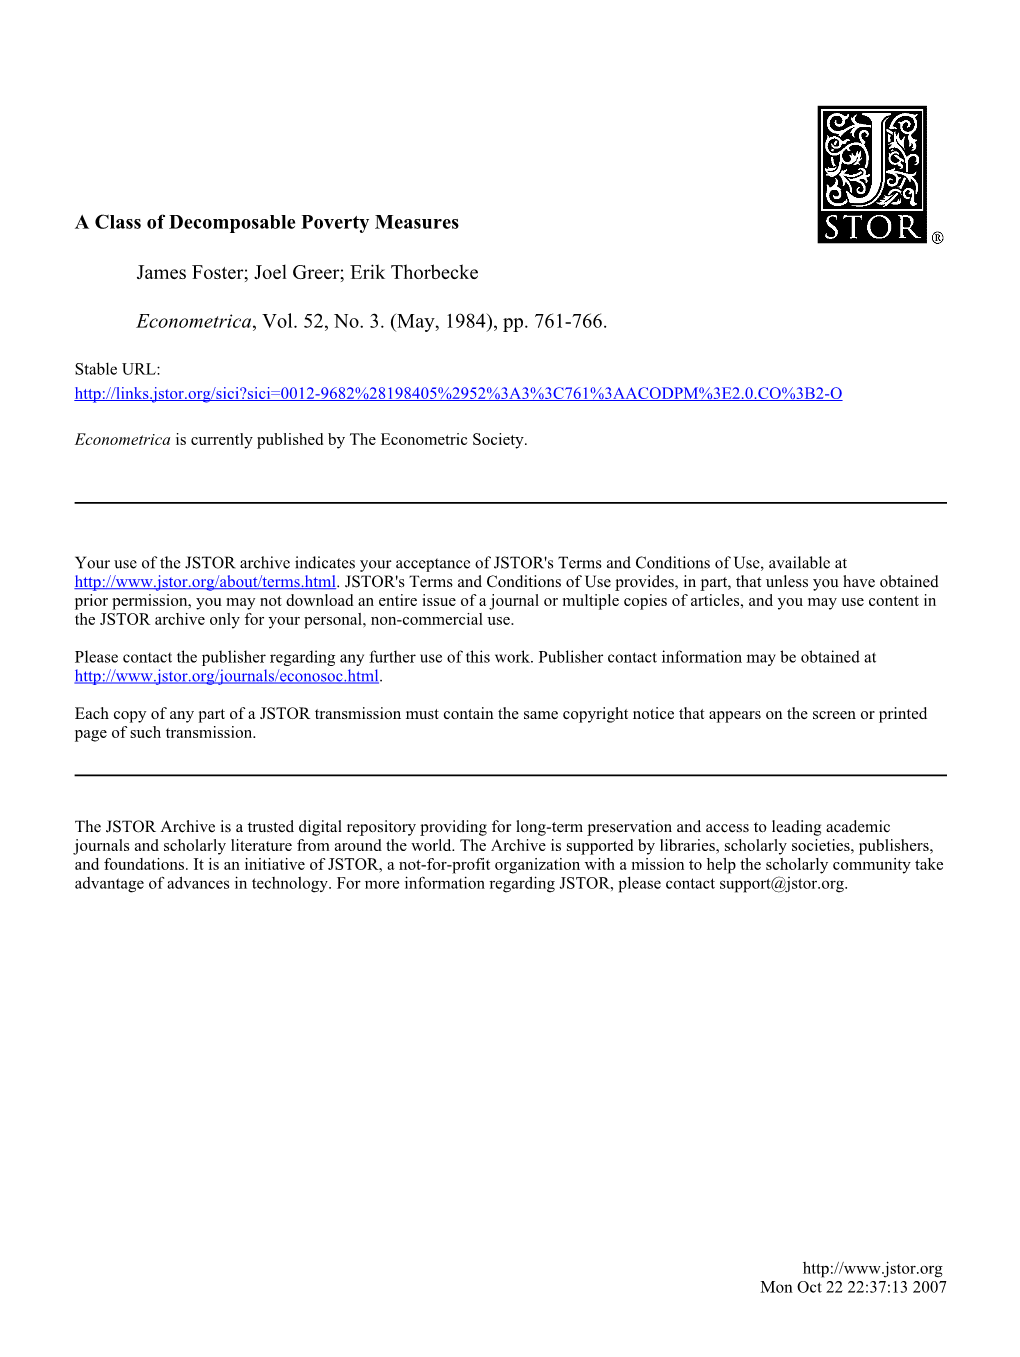 A Class of Decomposable Poverty Measures James Foster; Joel Greer; Erik Thorbecke Econometrica, Vol